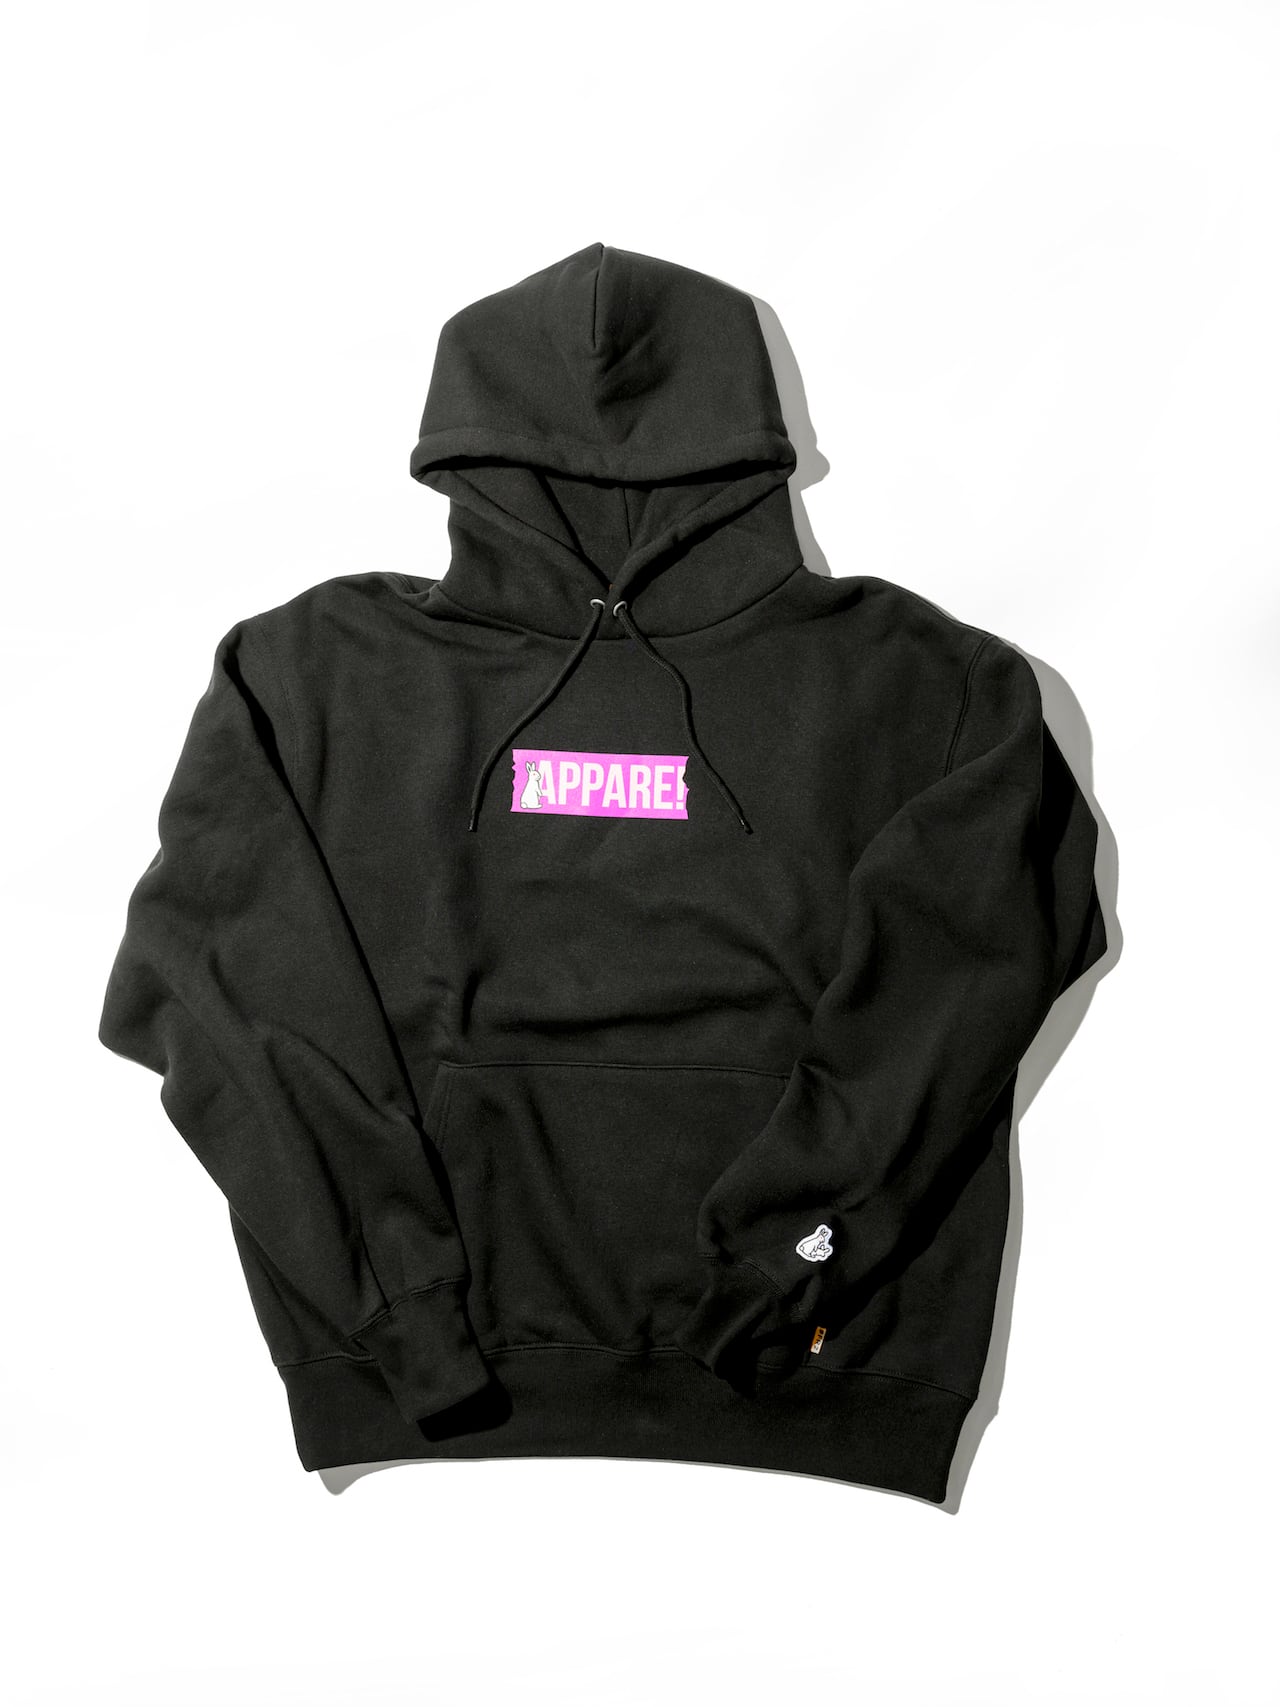 Appare! collaboration with #FR2 Box Logo Hoodie